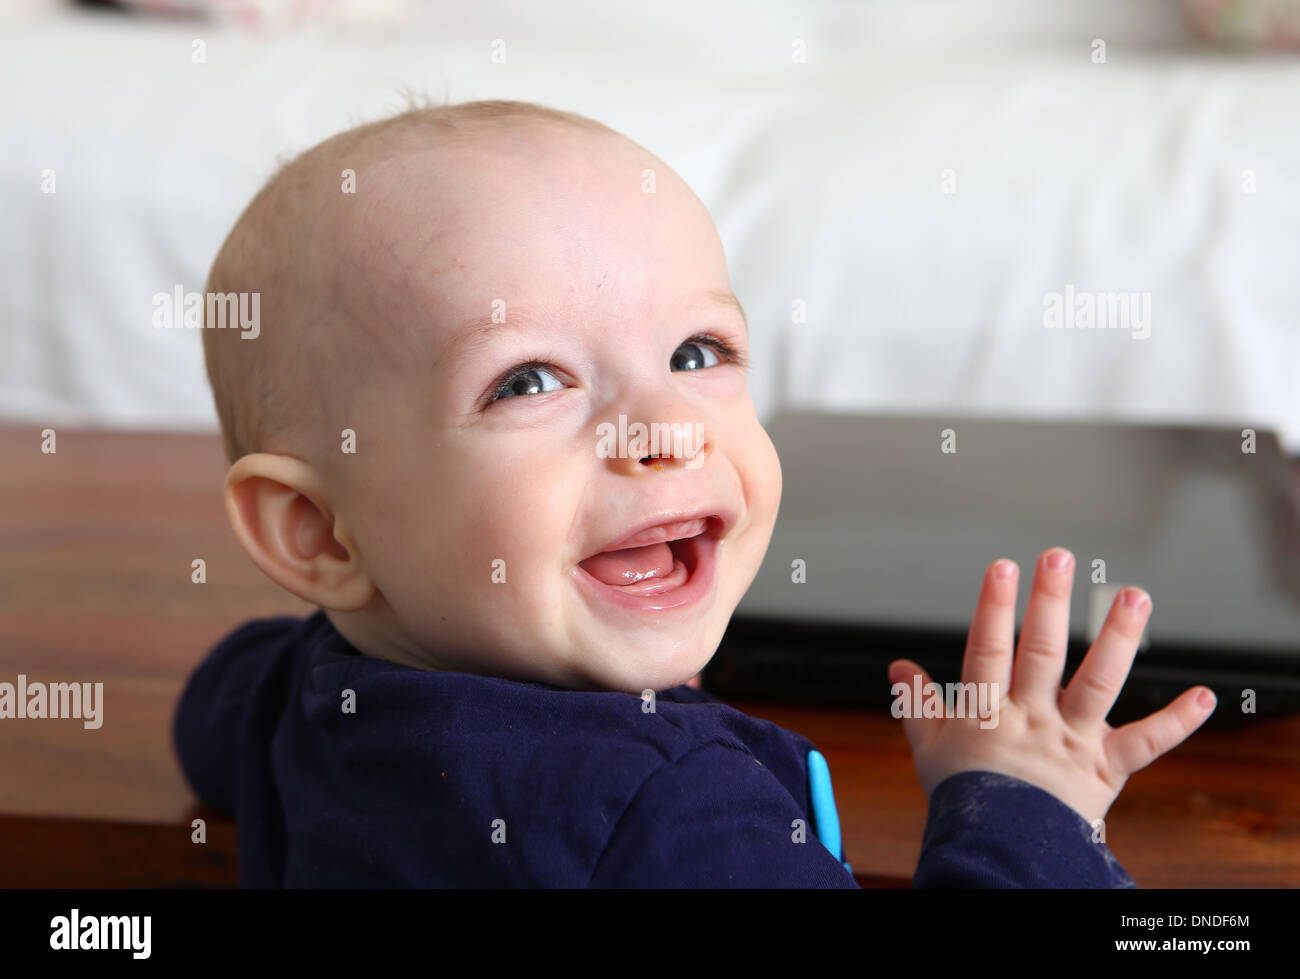 9 months old baby boy laughing Stock Photo